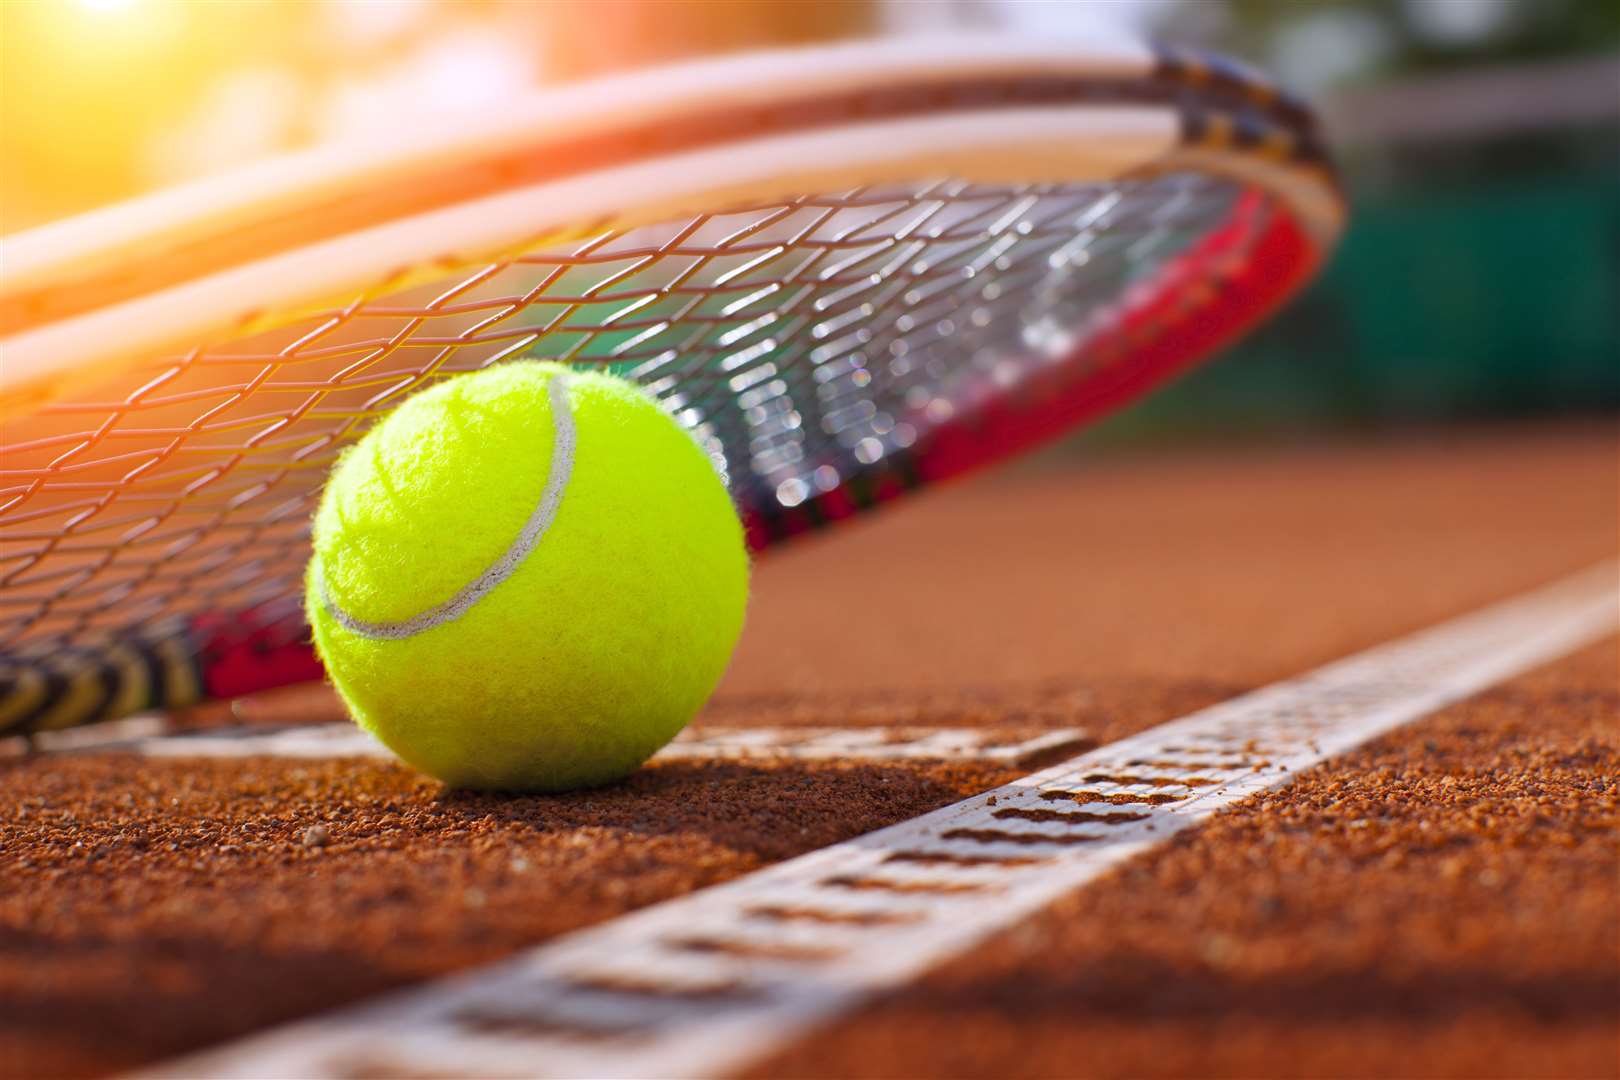 Whether a novice or looking to get back into the sport, tennis is for everyone.